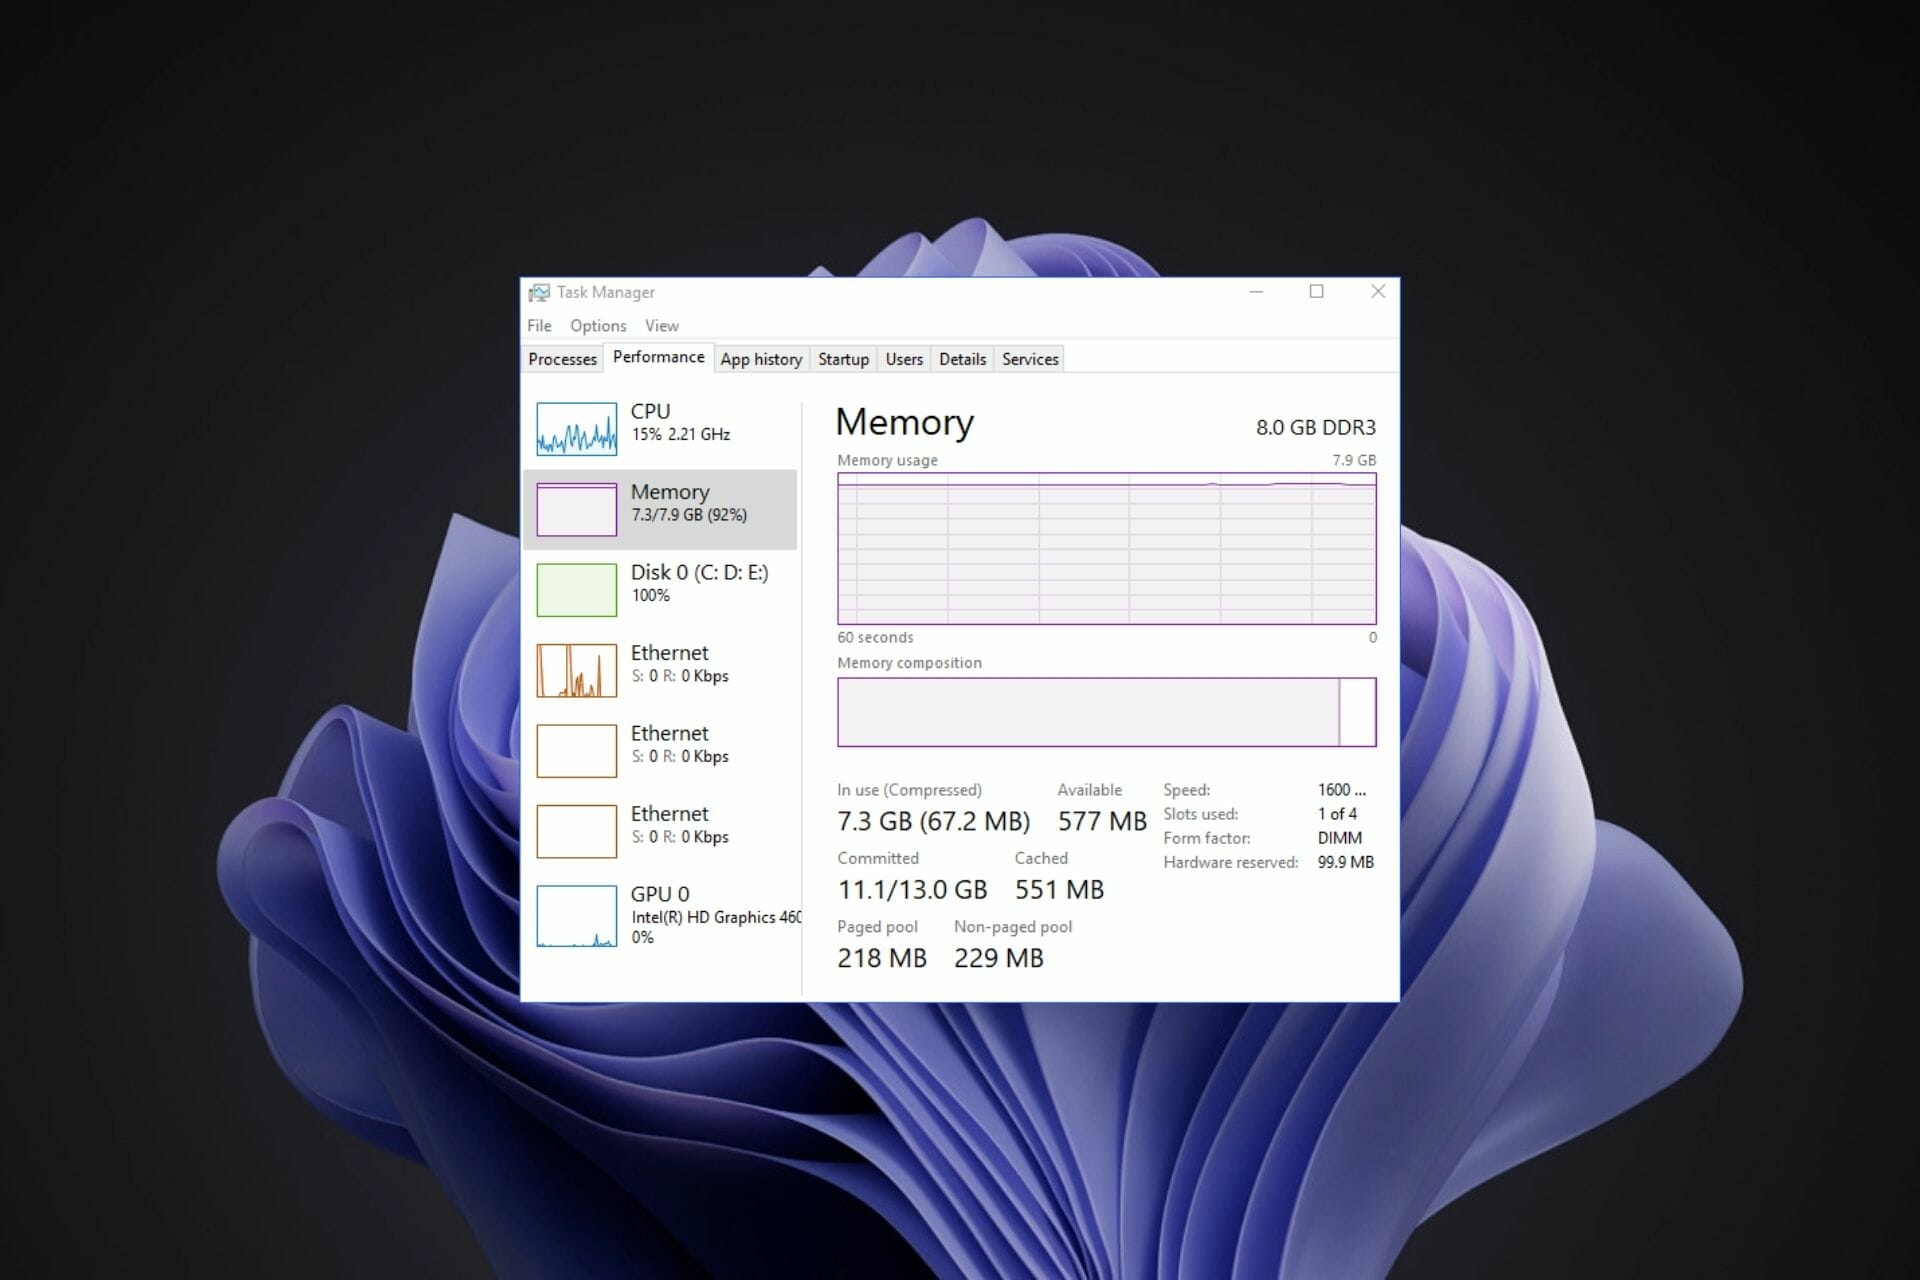 RAM requirements for Windows 10: How many GB are needed? 